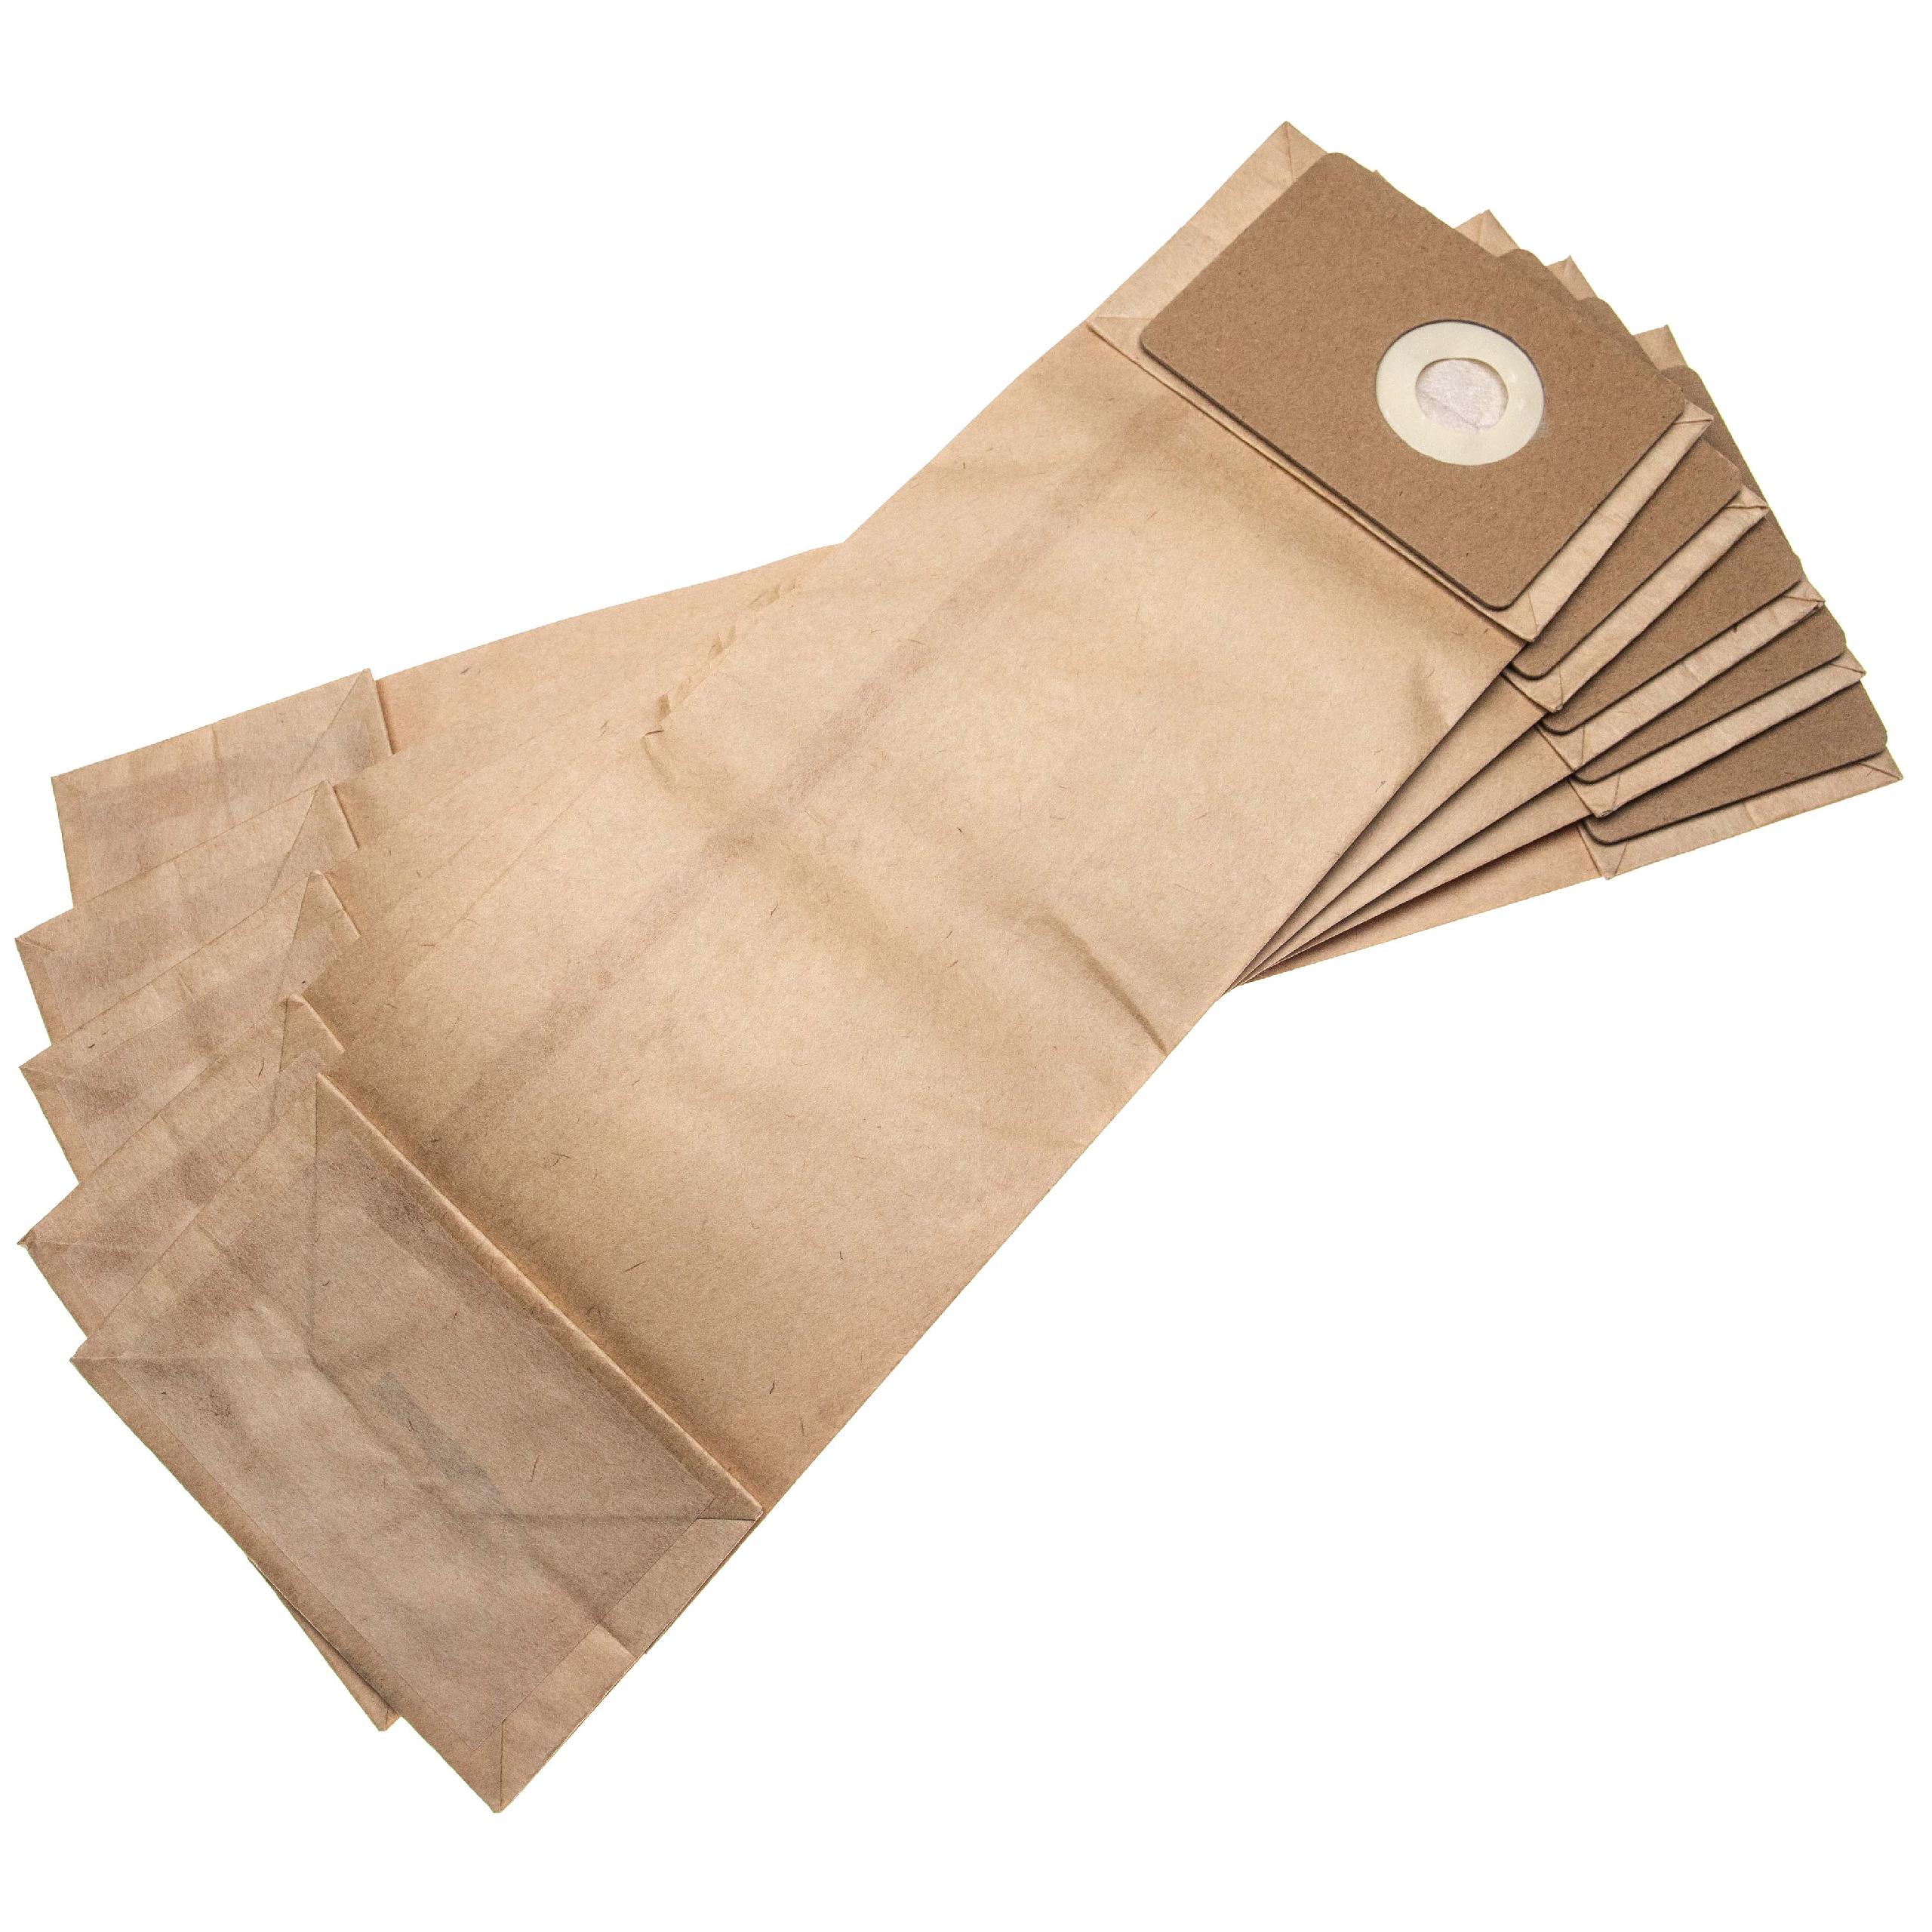 5x Vacuum Cleaner Bag replaces Nilfisk 1471058500, 107413586 for Clarke - paper